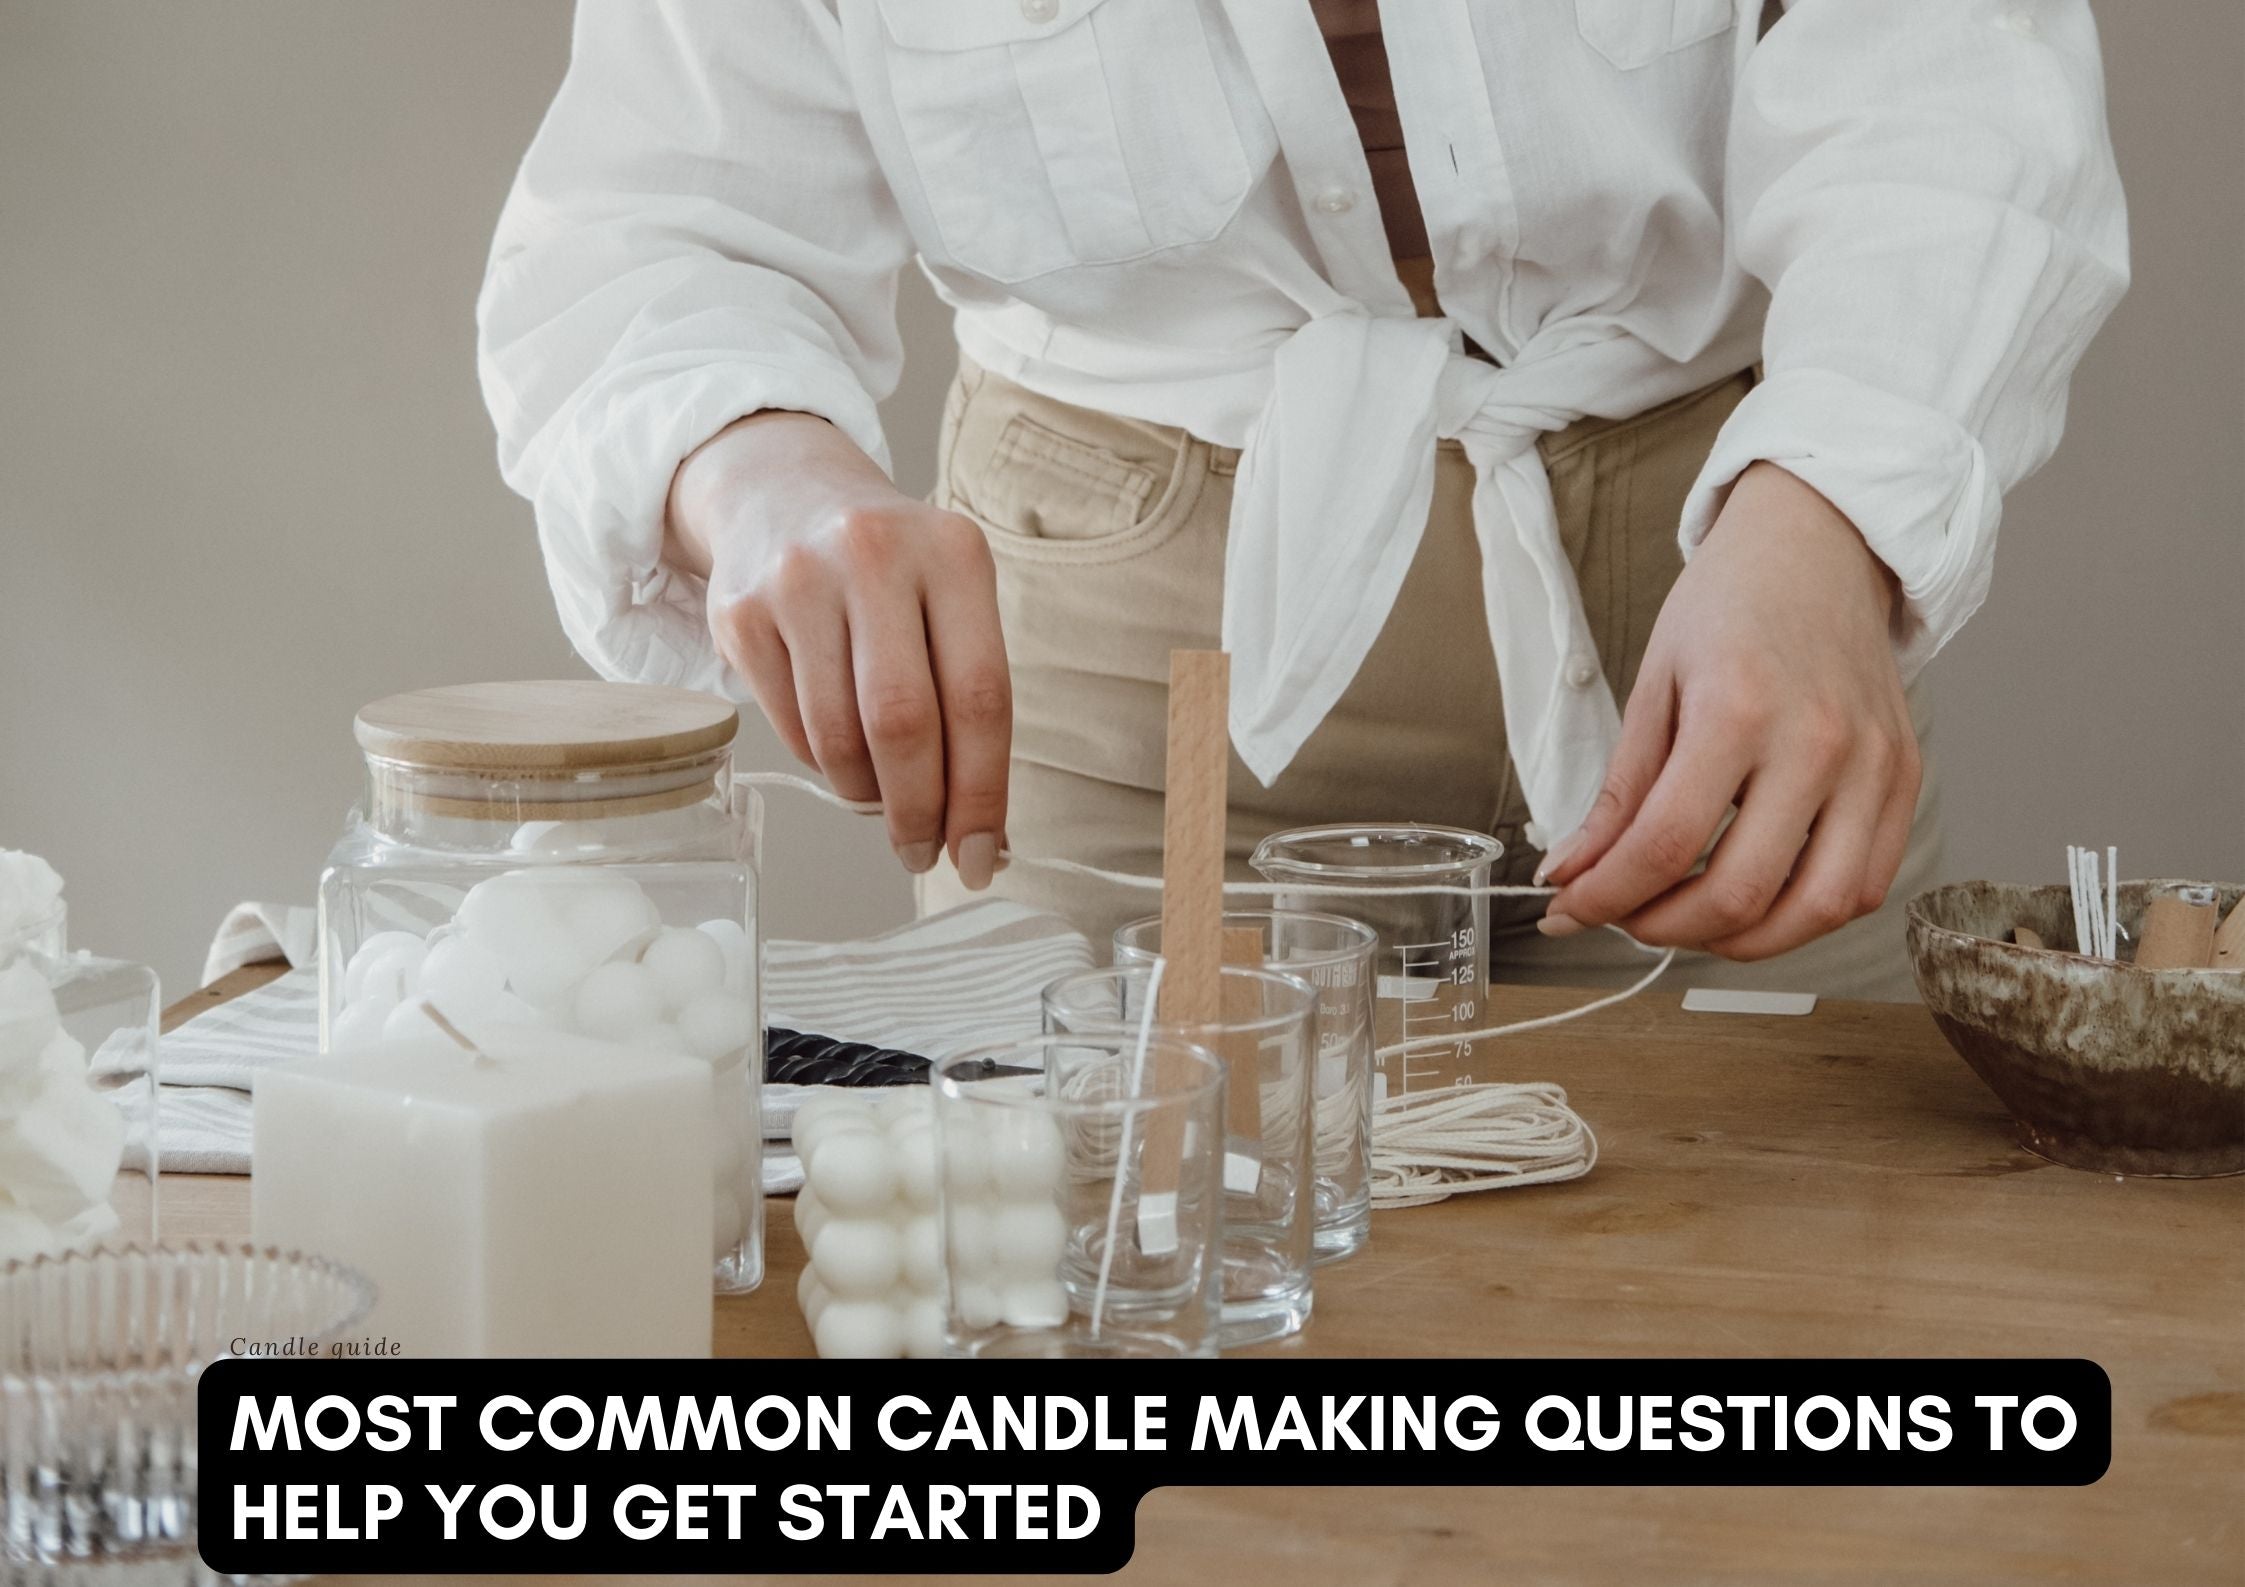 Most common candle making questions to help you get started